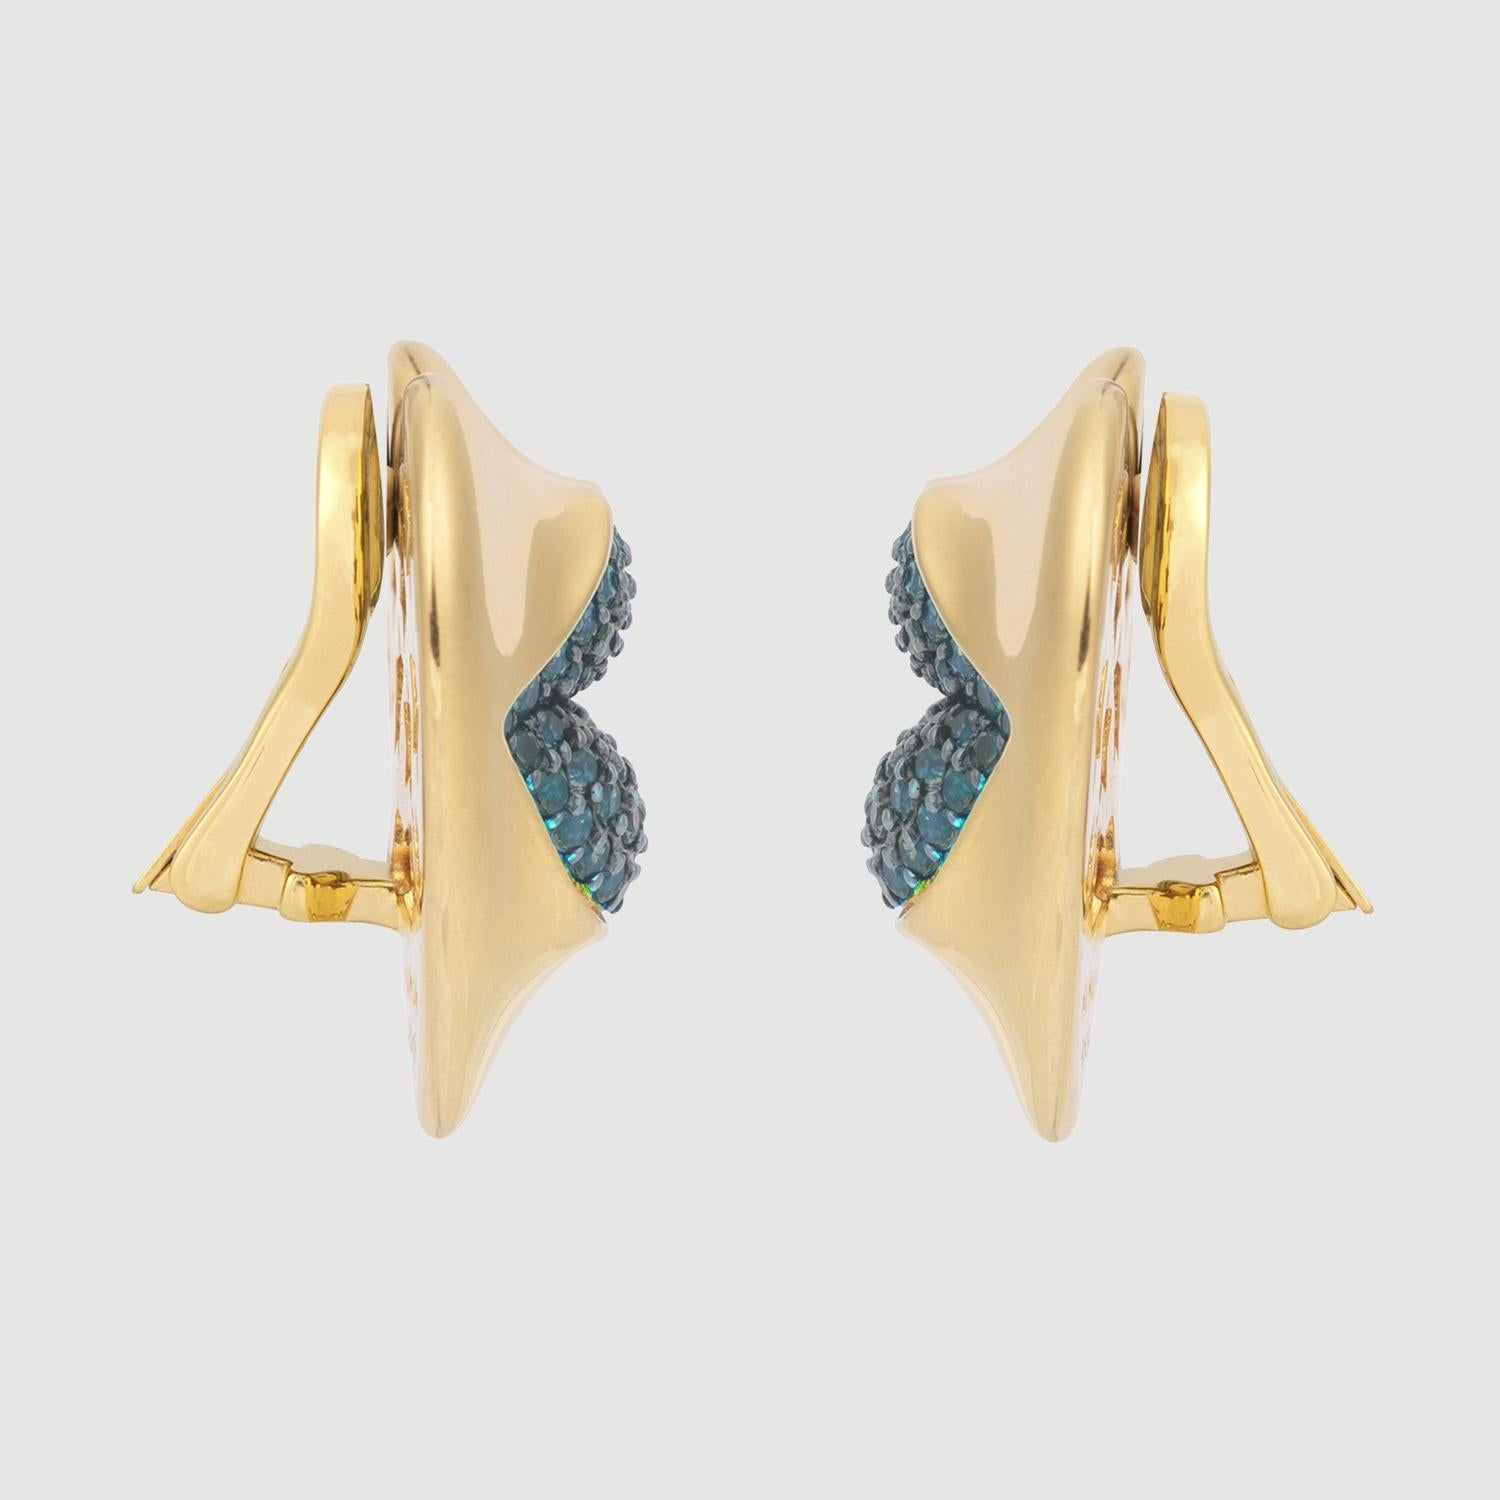 Love starts with the heart and lasts on the lips. These might be the sexiest earrings ever! Our sexy gold statement heart earrings with Aquamarine kisses. Shine your love on!

Composition: Sterling Silver, 18k gold vermeil and Rhodium plated.
Color: